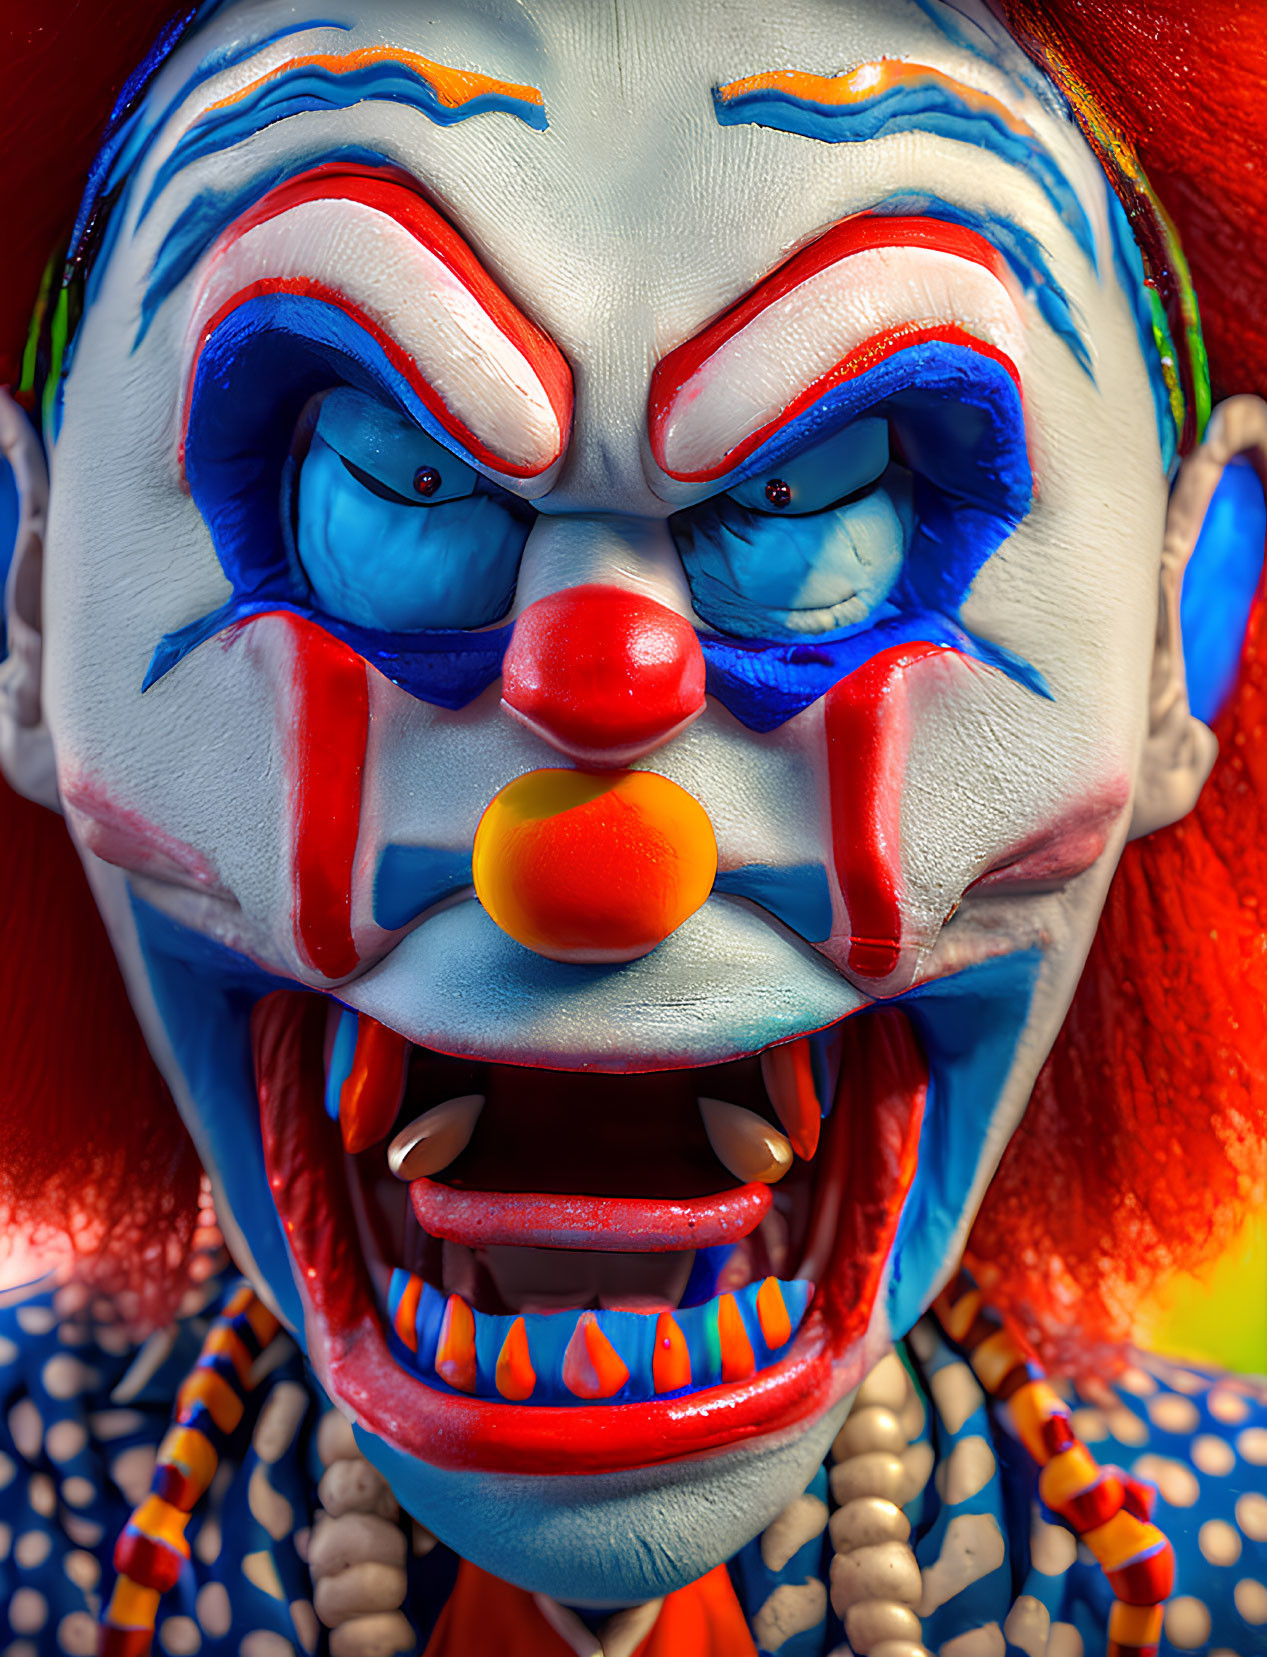 Detailed Close-Up of Scary Clown with Exaggerated Features